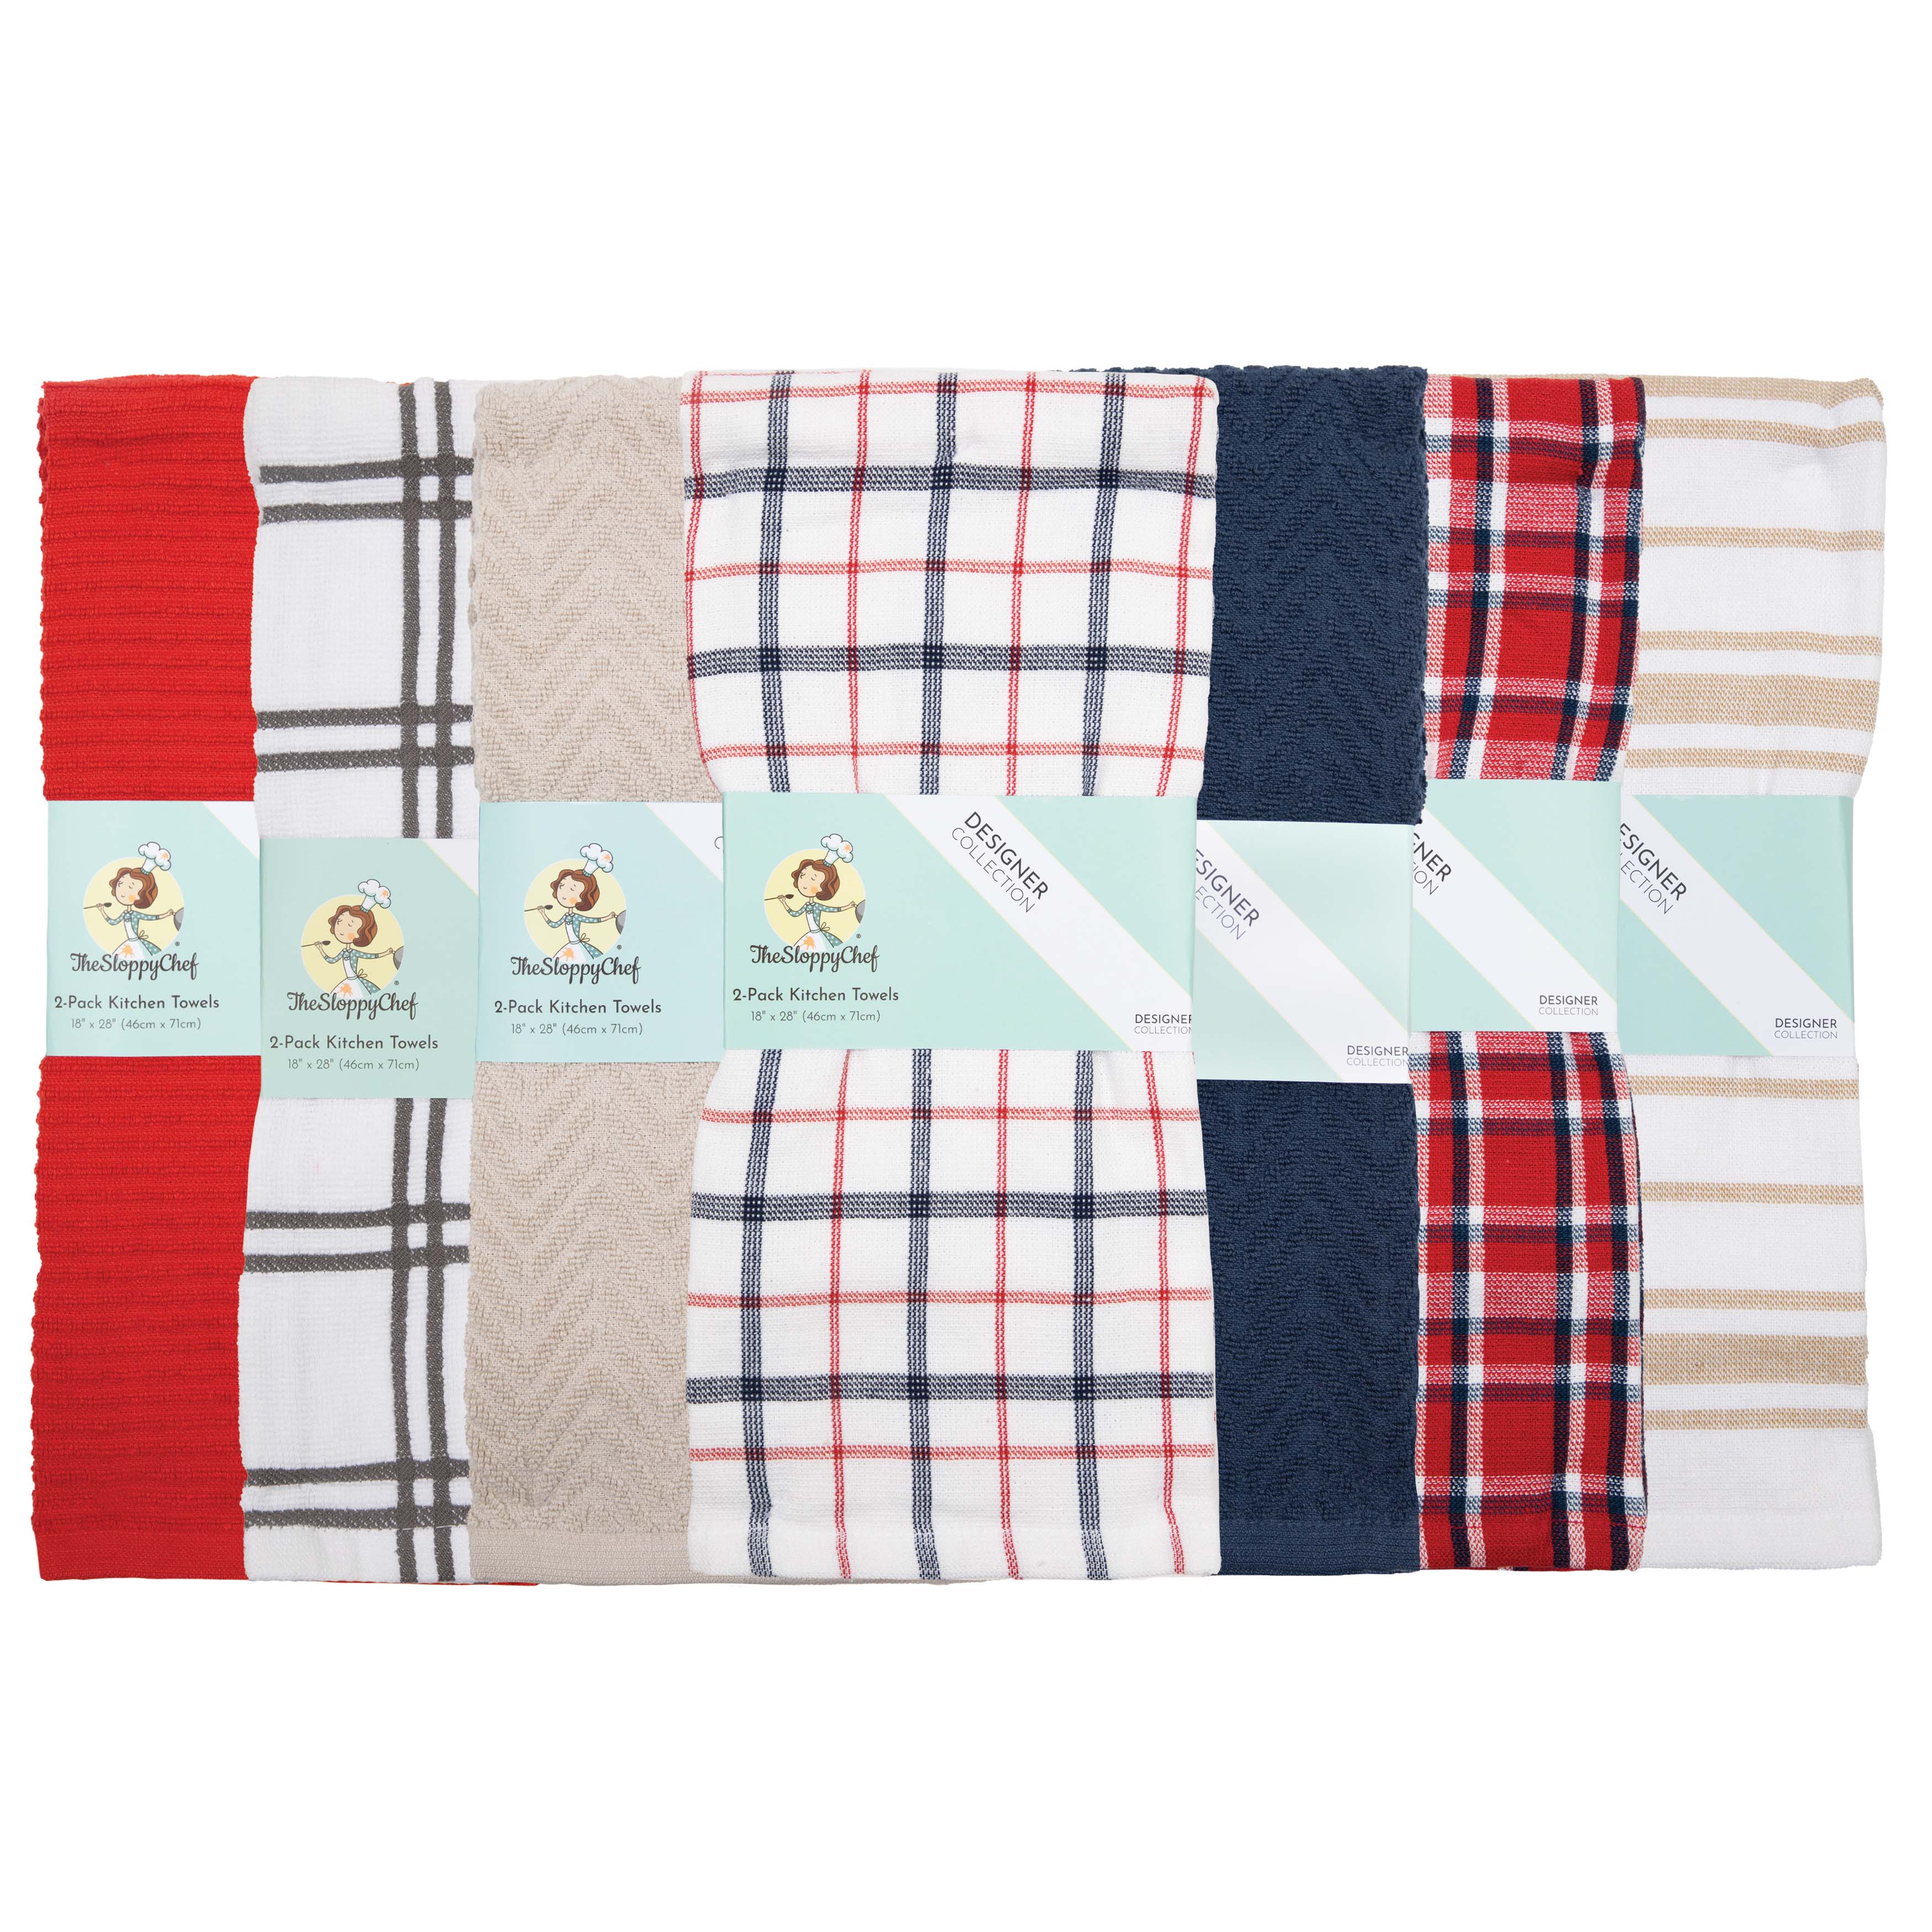 Sloppy Chef Designer Americana Kitchen Towel 2-Piece Sets (Bulk Case of 48 Sets), Cotton, 18x28 in., Assorted Colors and Patterns